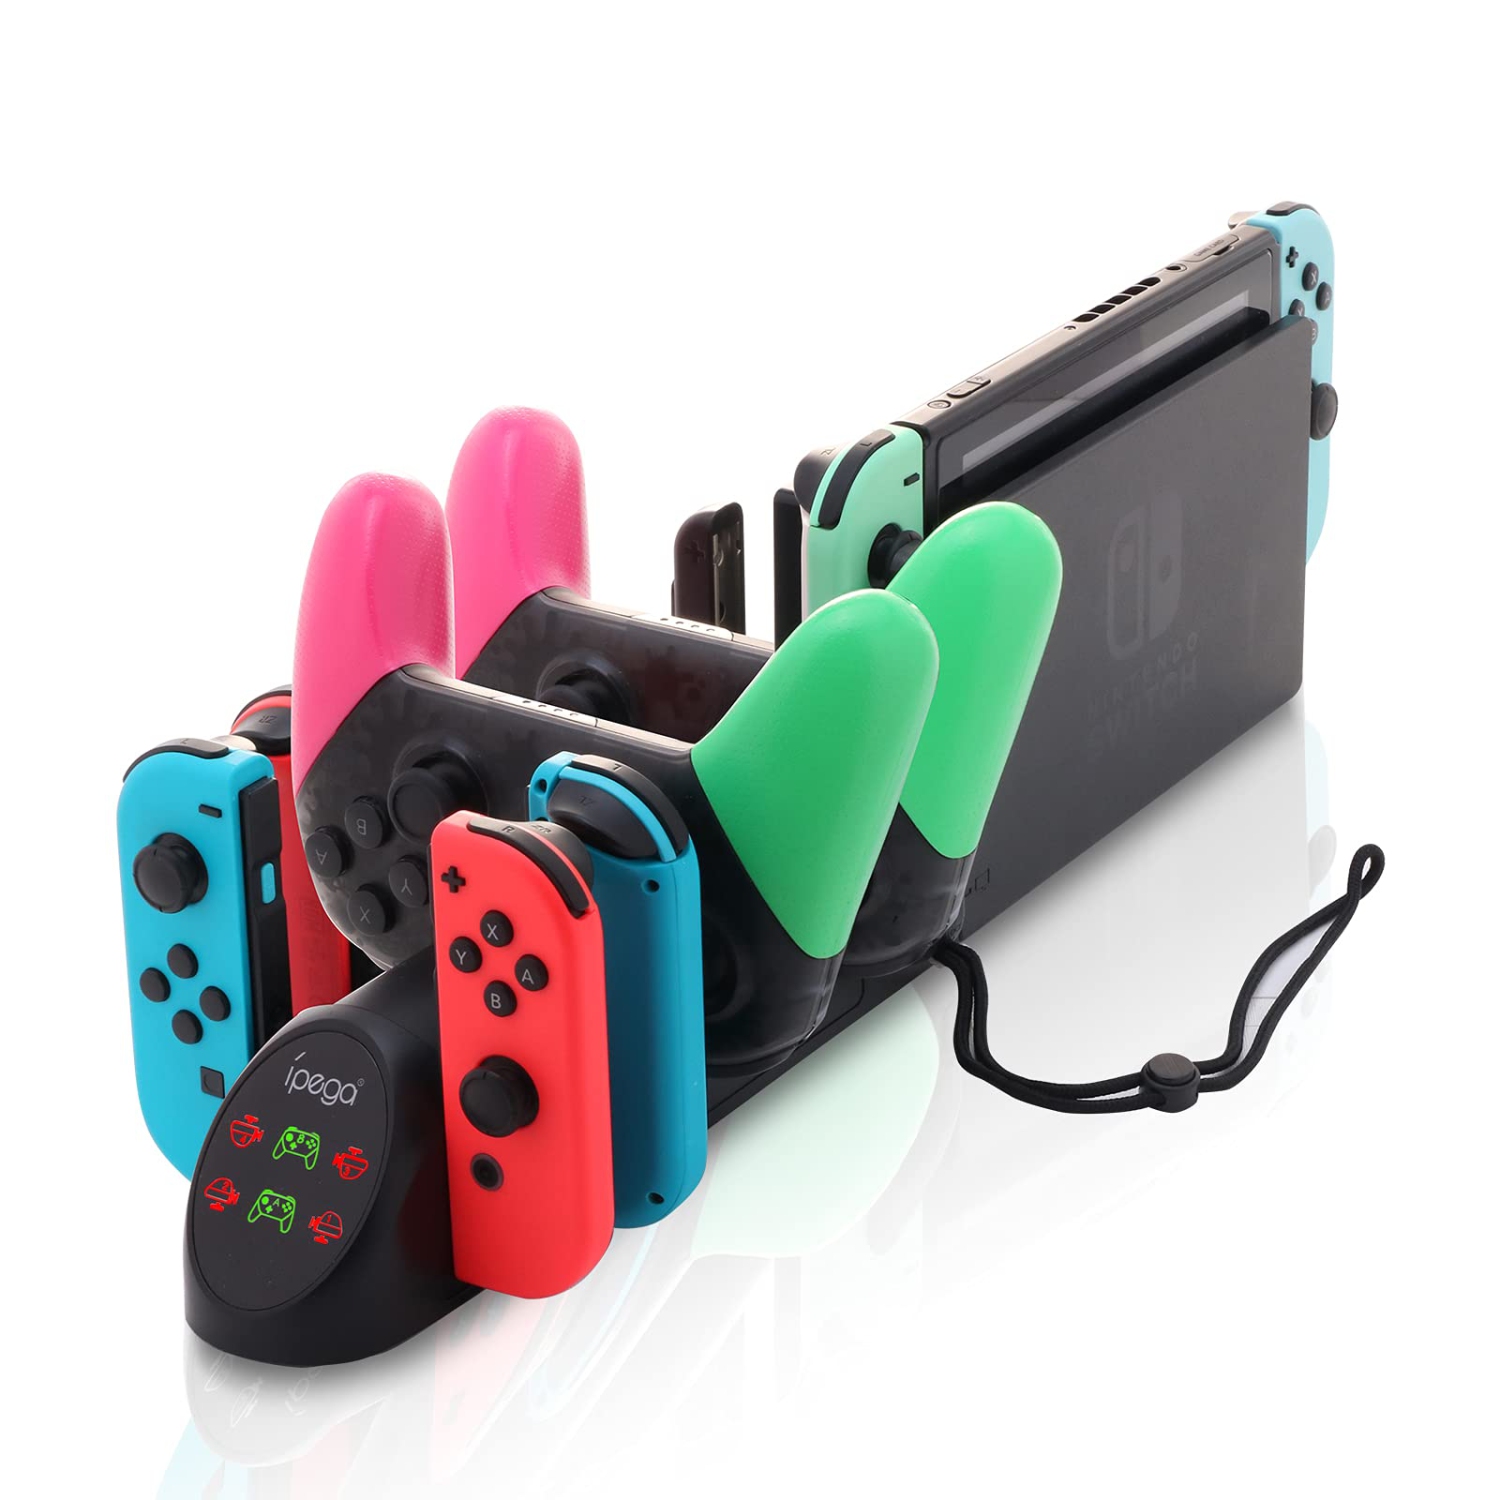 Controller Charger for Nintendo Switch, Charger for 4 Switch Joy-Con Controllers, 2 Switch Pro Controllers, 2 Joy-con Wrist